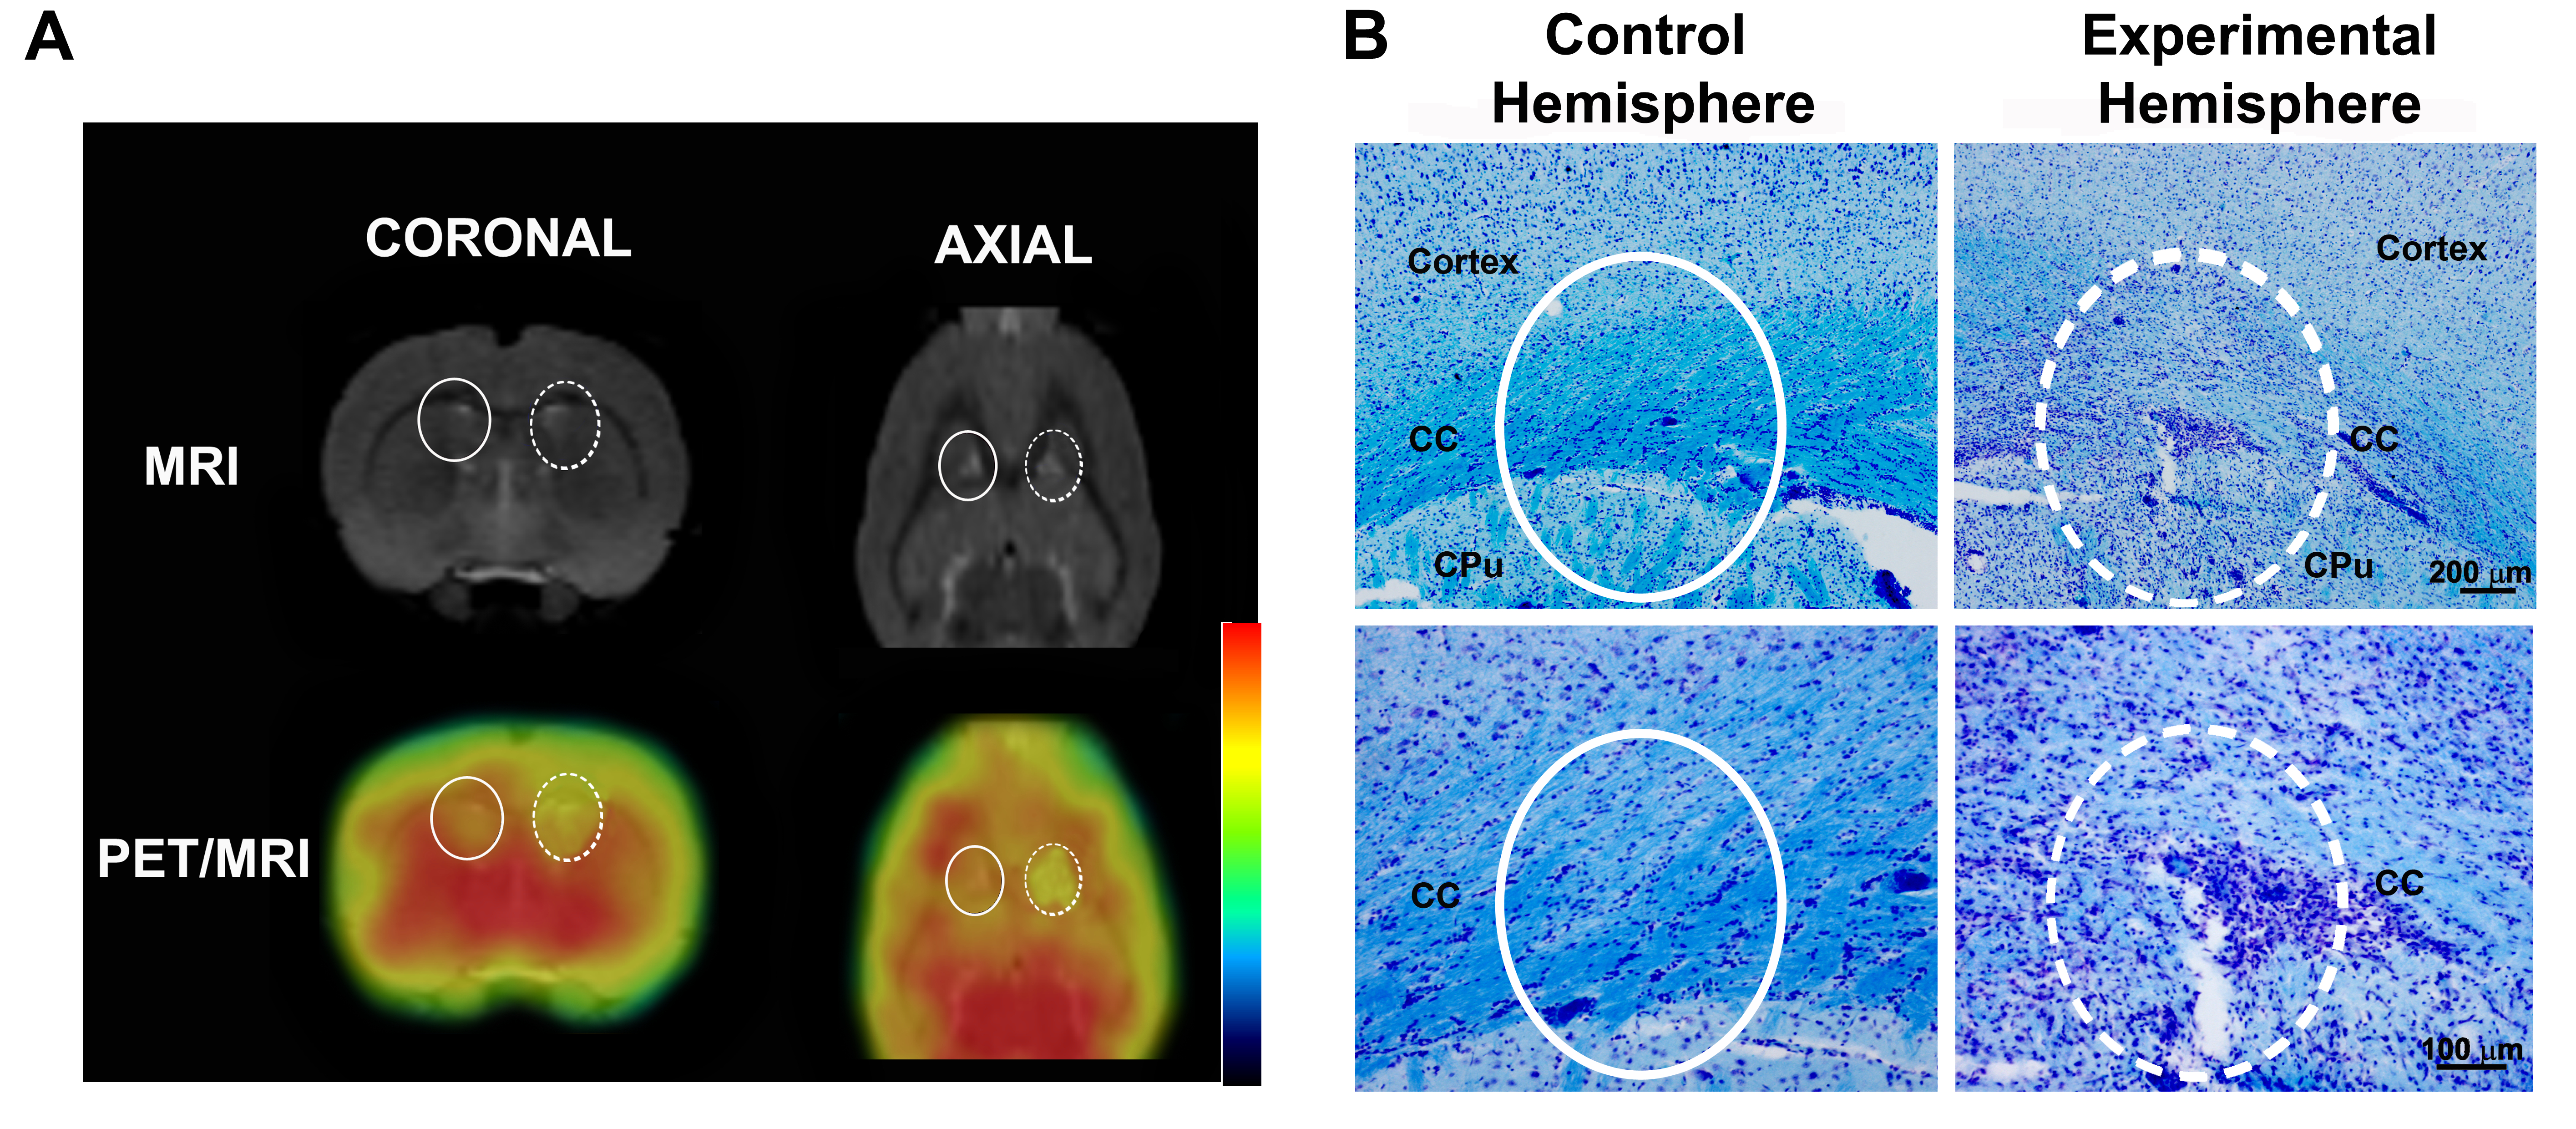 Positron Emission Tomography Imaging for In Vivo Measuring of